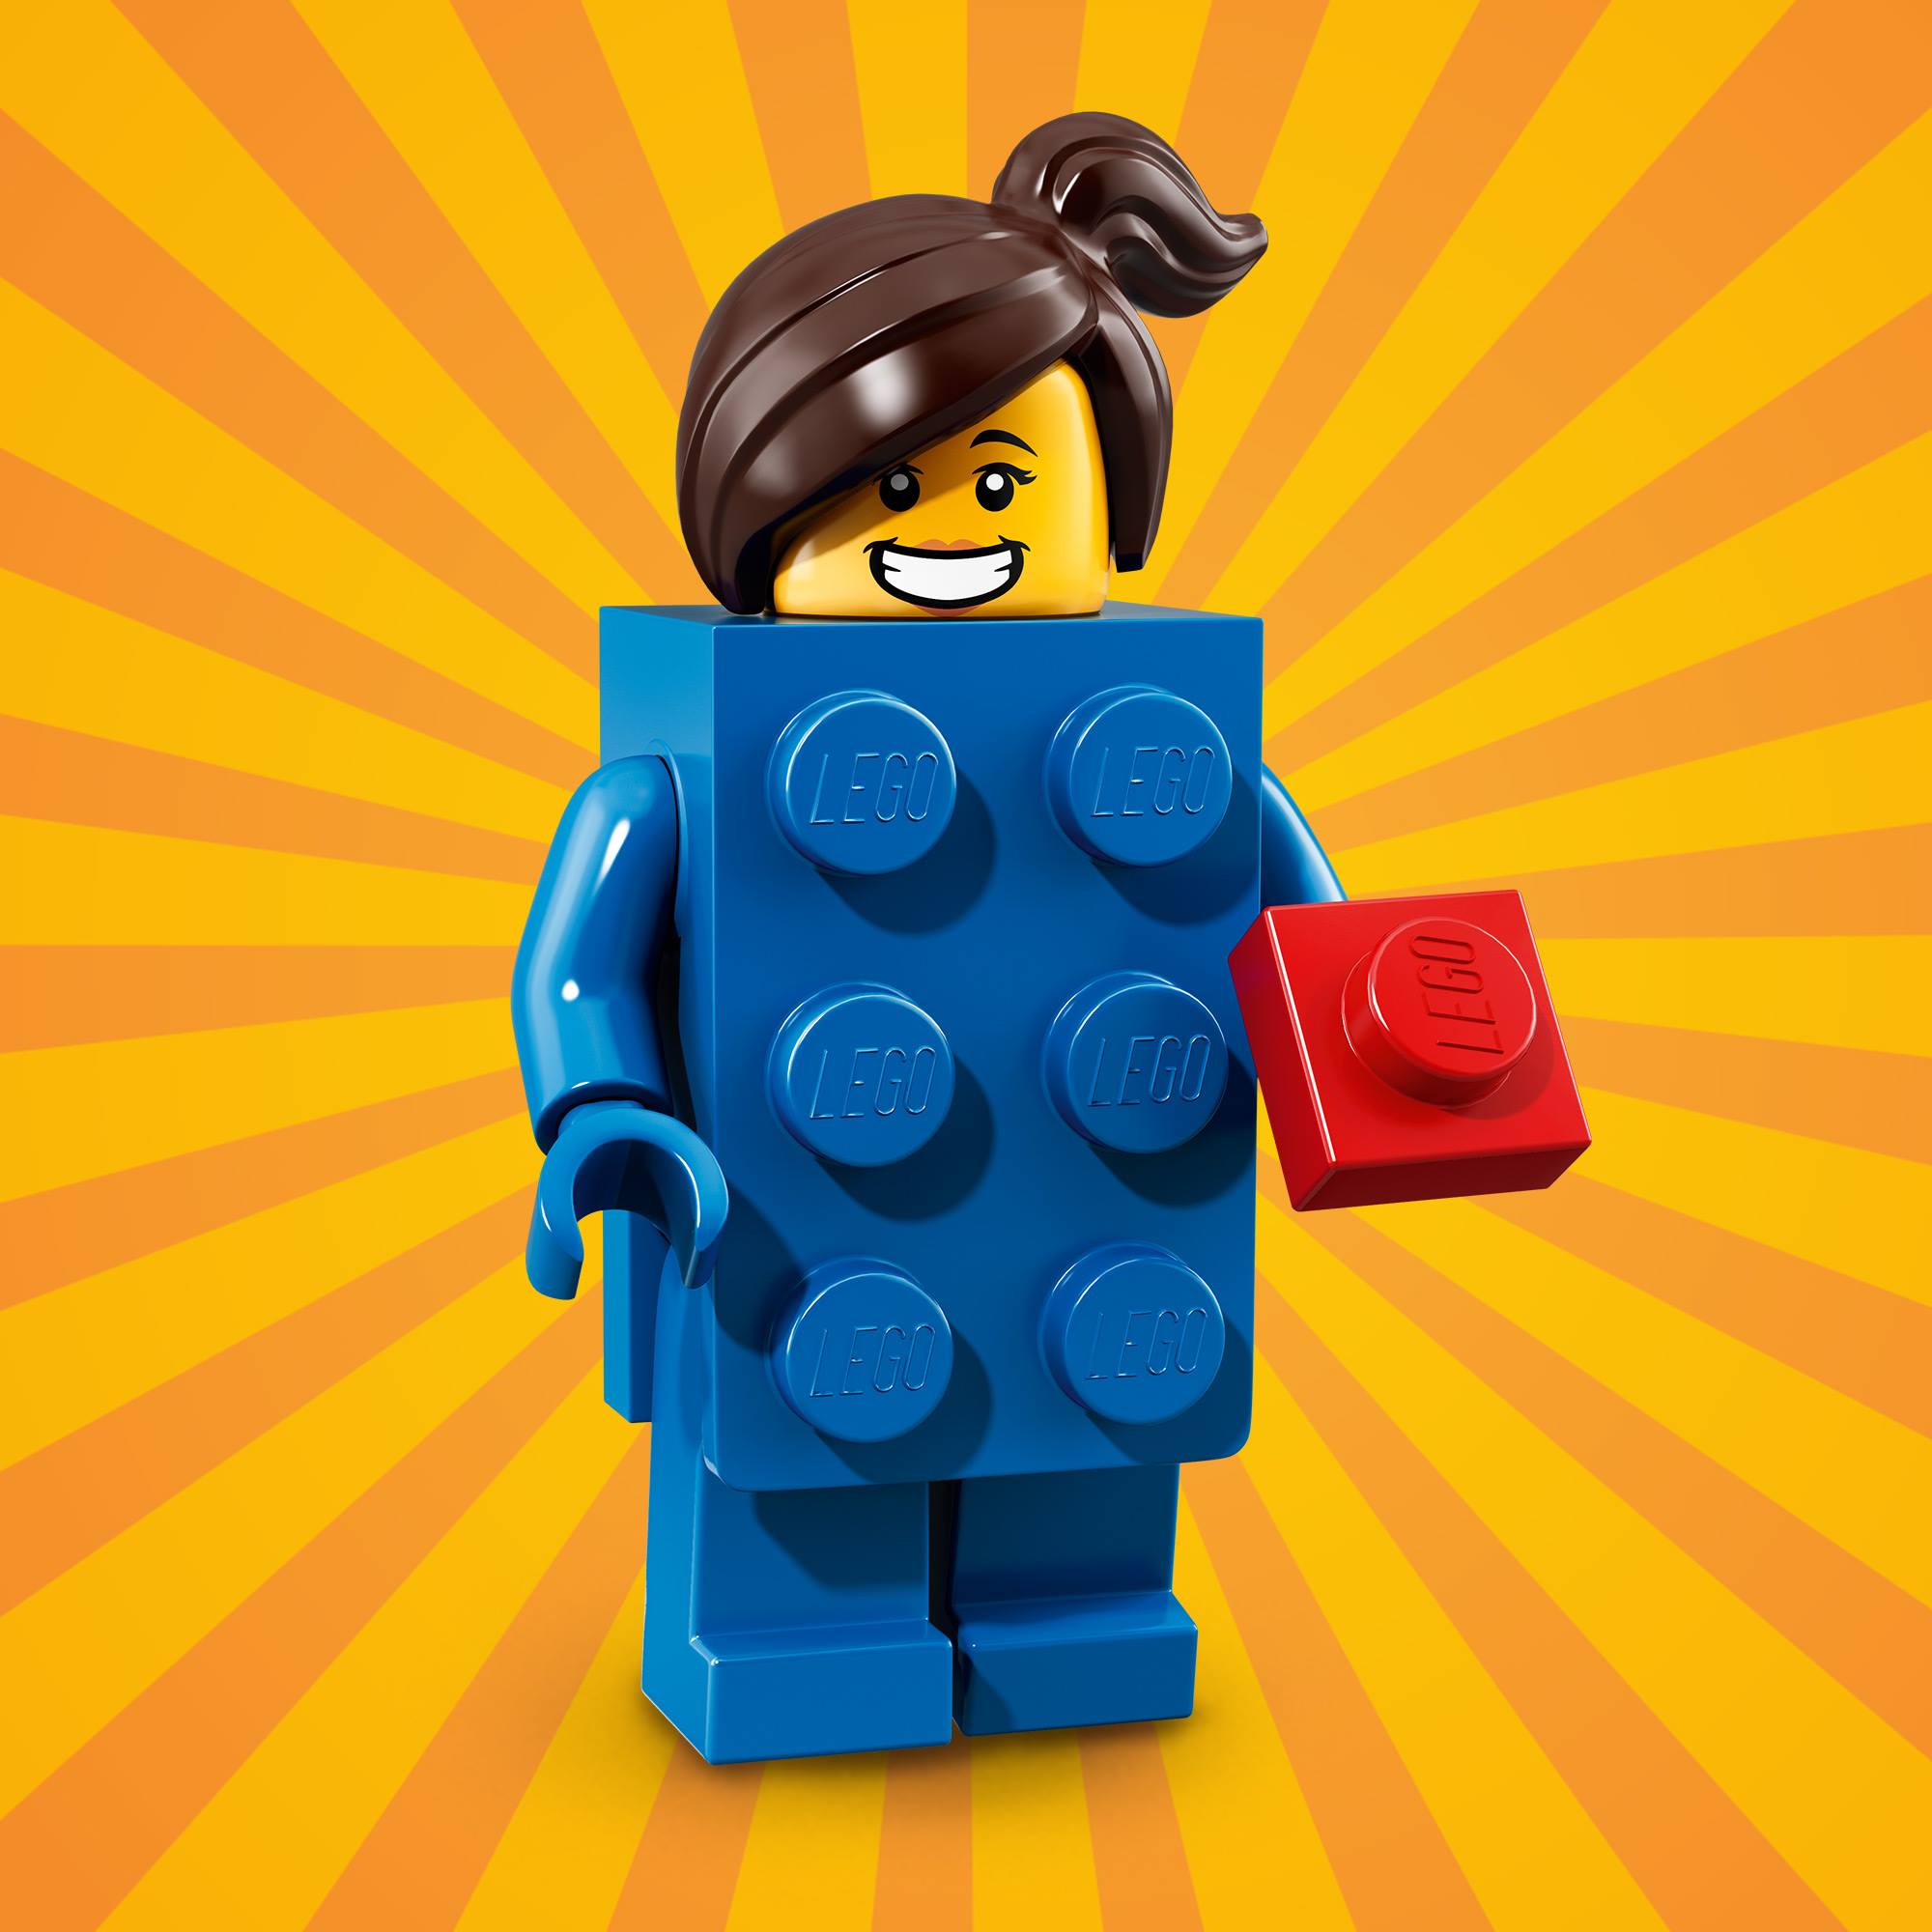 download free lego minifigures online game